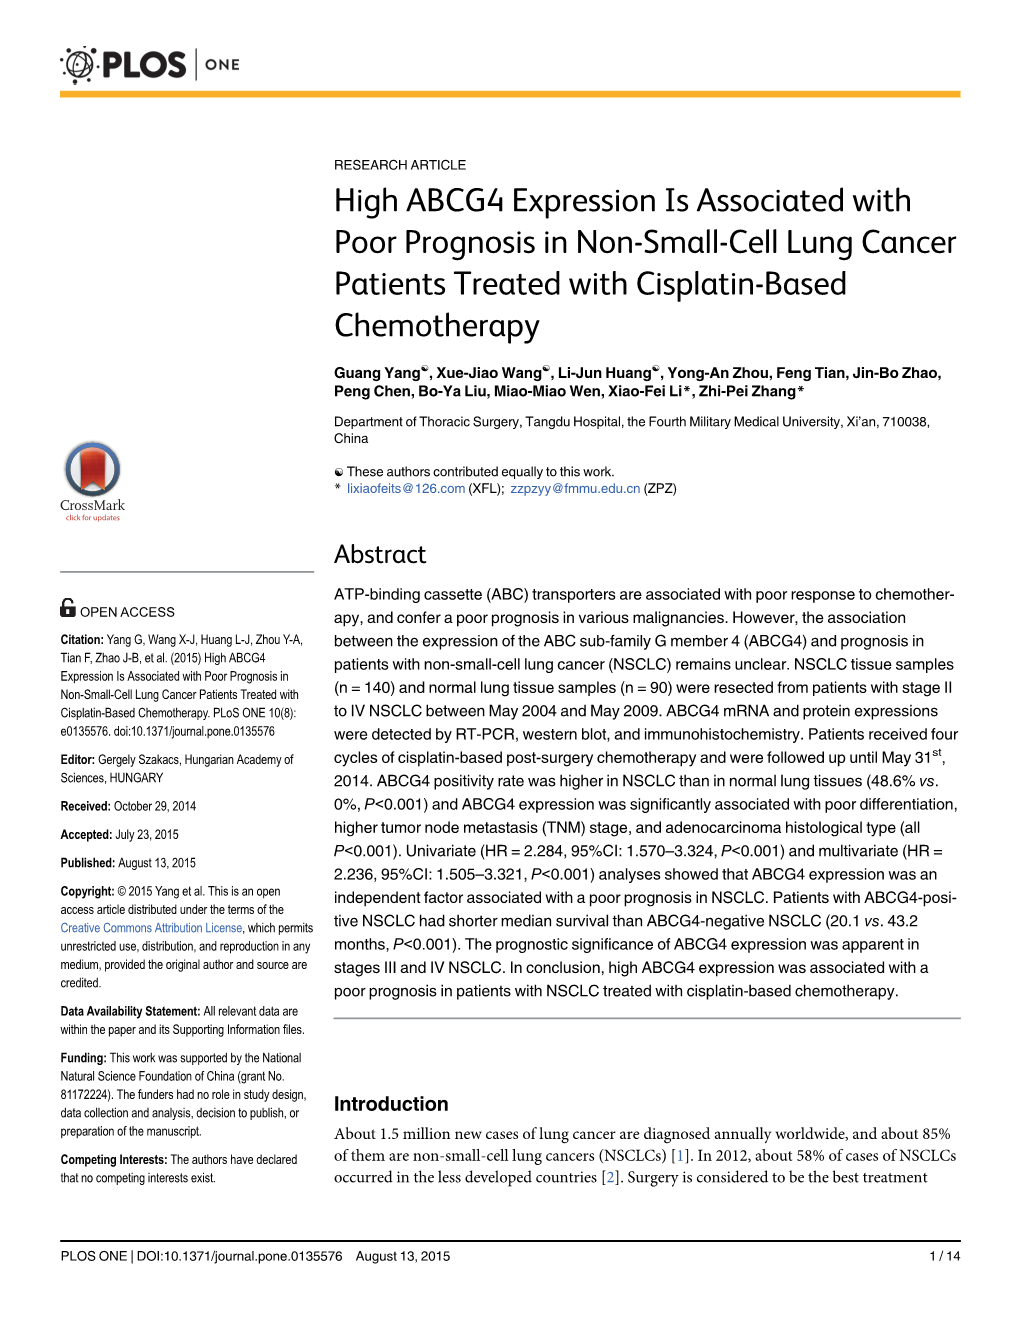 High ABCG4 Expression Is Associated with Poor Prognosis in Non-Small-Cell Lung Cancer Patients Treated with Cisplatin-Based Chemotherapy